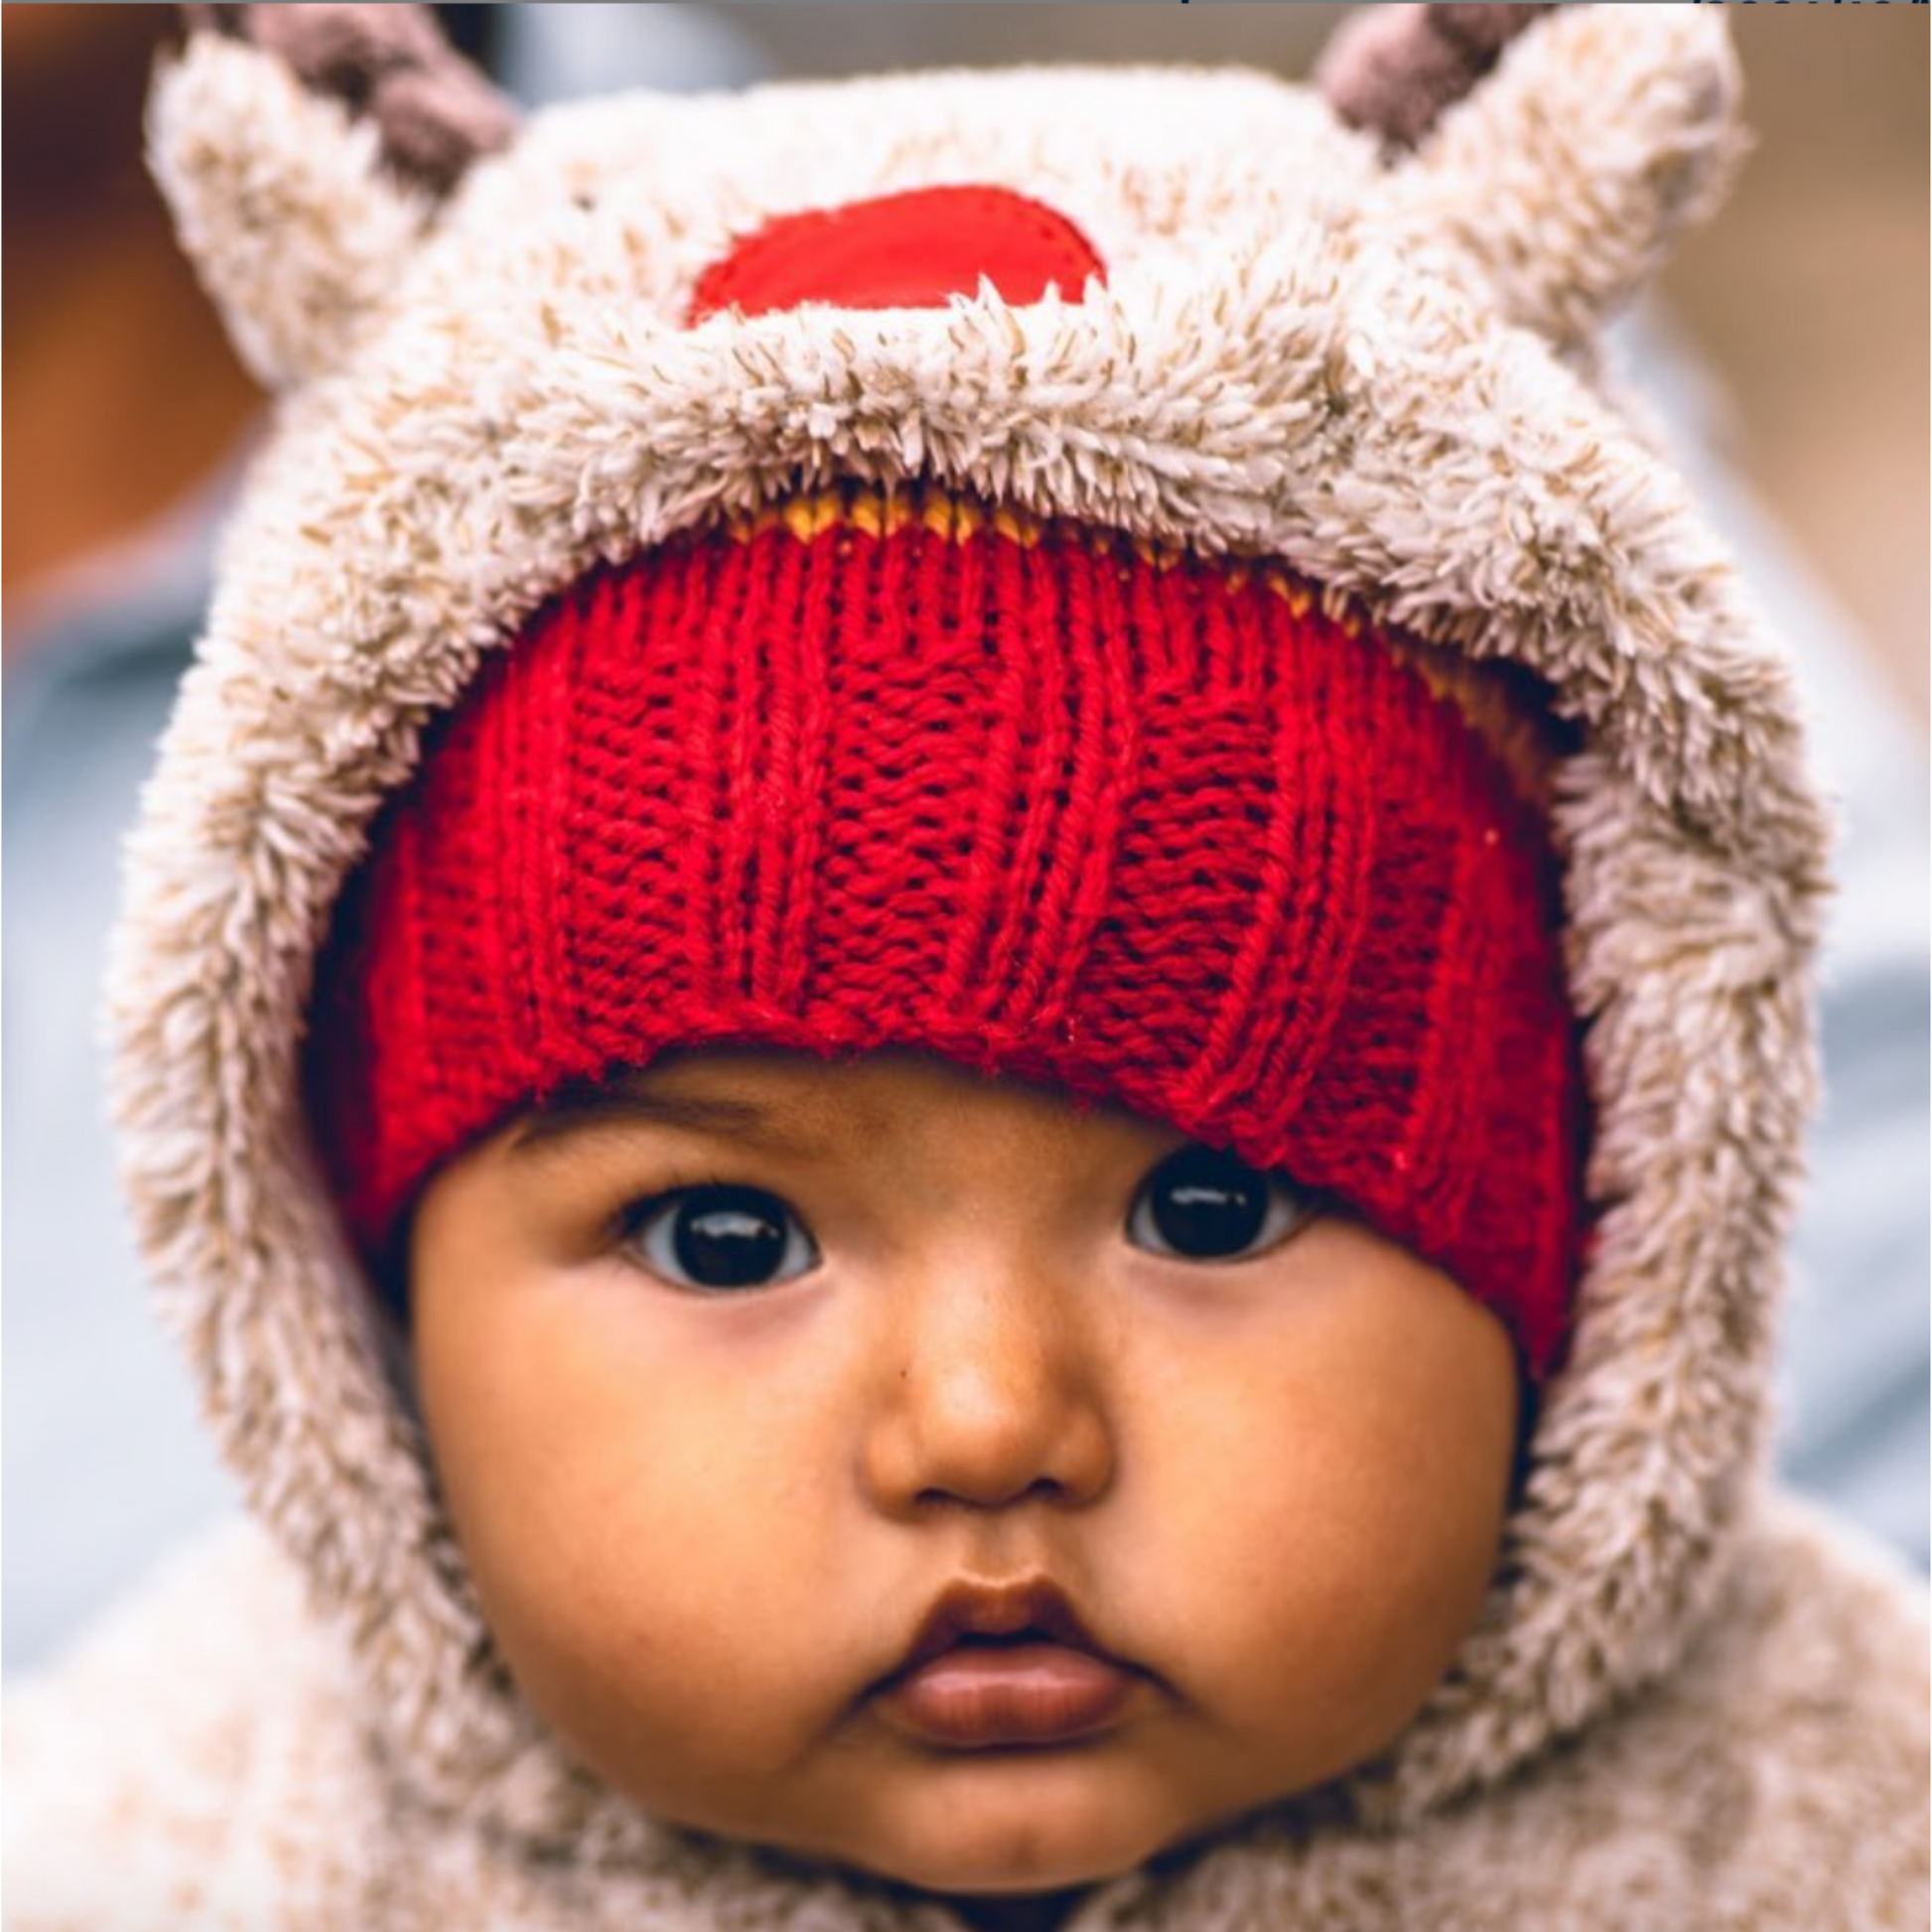 Close shot of a baby's face wearing a warm hat and covered with a fluffy hoodie.